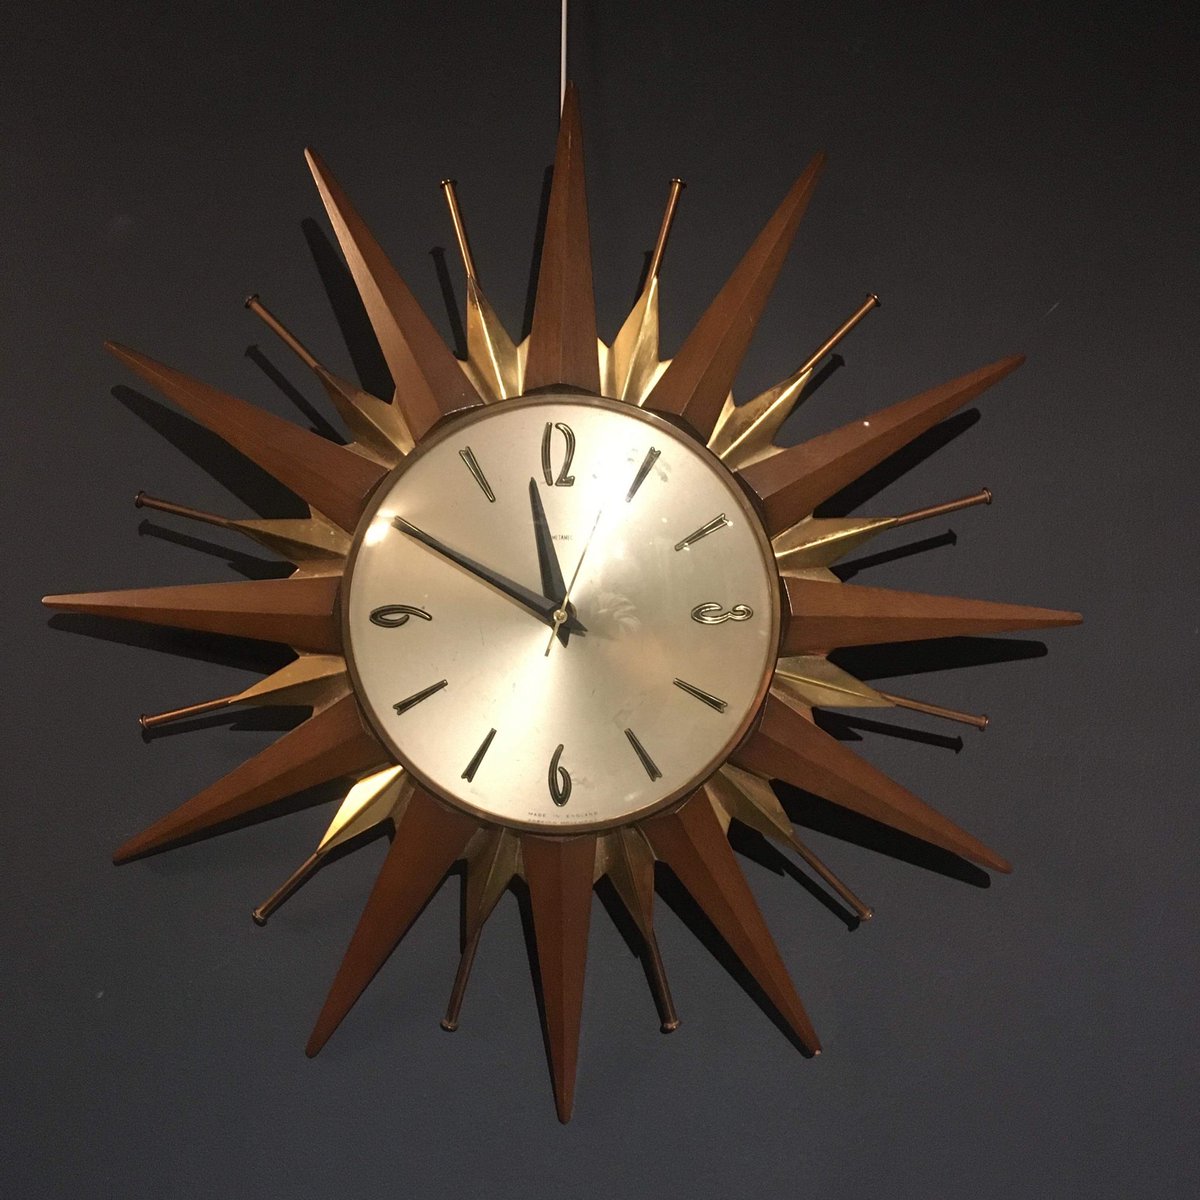 Don’t forget the clocks go back tonight. See you at our Midlands Show 11-4pm, after a well deserved extra hour in bed! Sports Connexions, Coventry, CV8 3FL It’s going to be a cracker #vintagehomeshow #coventry #midlands #myvintagehome #howivintage #vintageinteriors